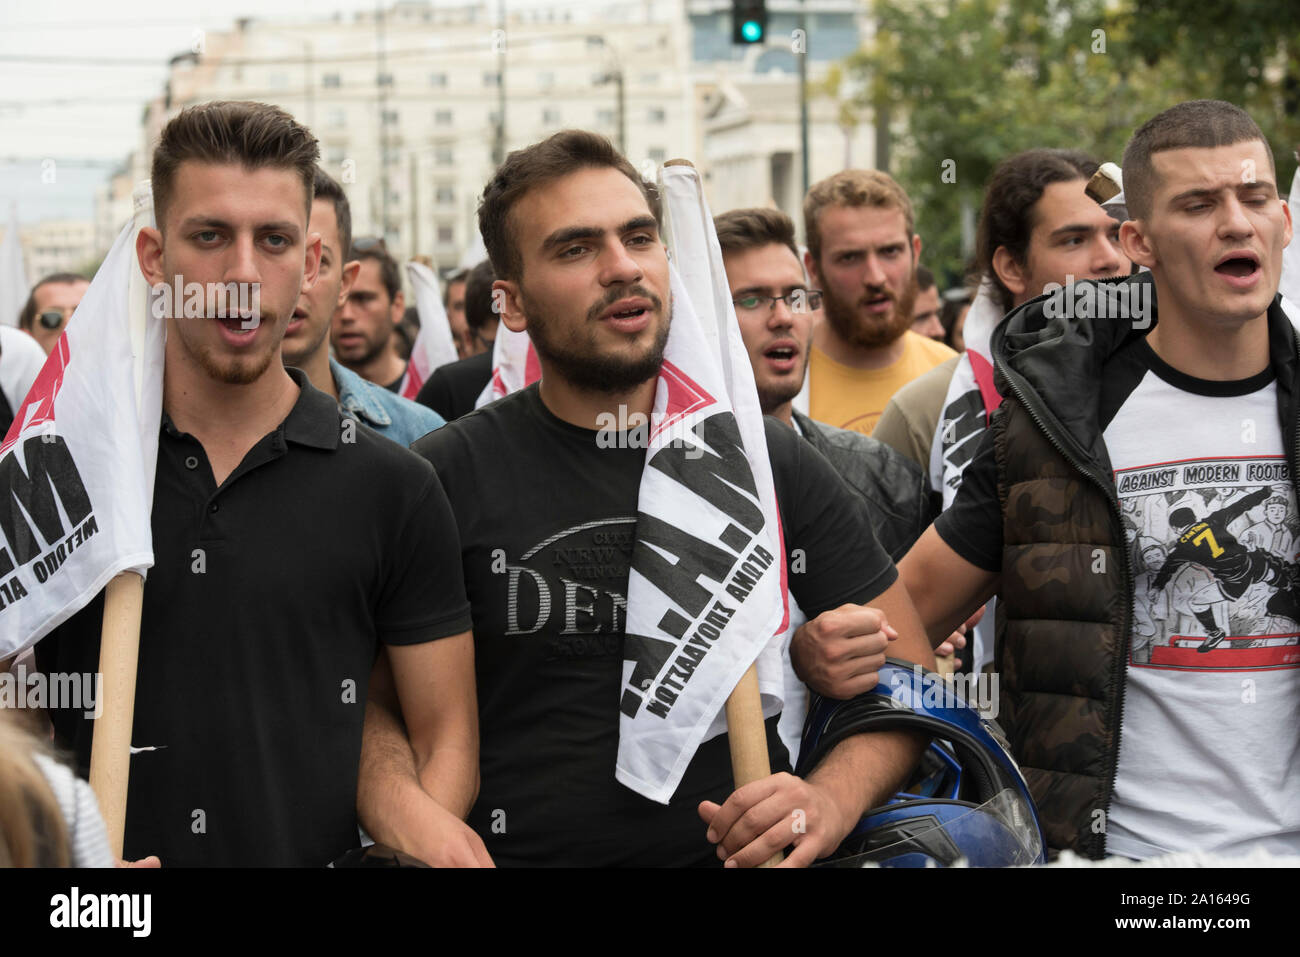 Athens, Greece. 24 September 2019. Strikers march holding banners and shouting slogans against austerity and amended labor laws. Thousands took to the streets participating in a 24 hour general strike organized by private and public sector unions, protesting against the government's policies on labor legislation. © Nikolas Georgiou / Alamy Live News Stock Photo